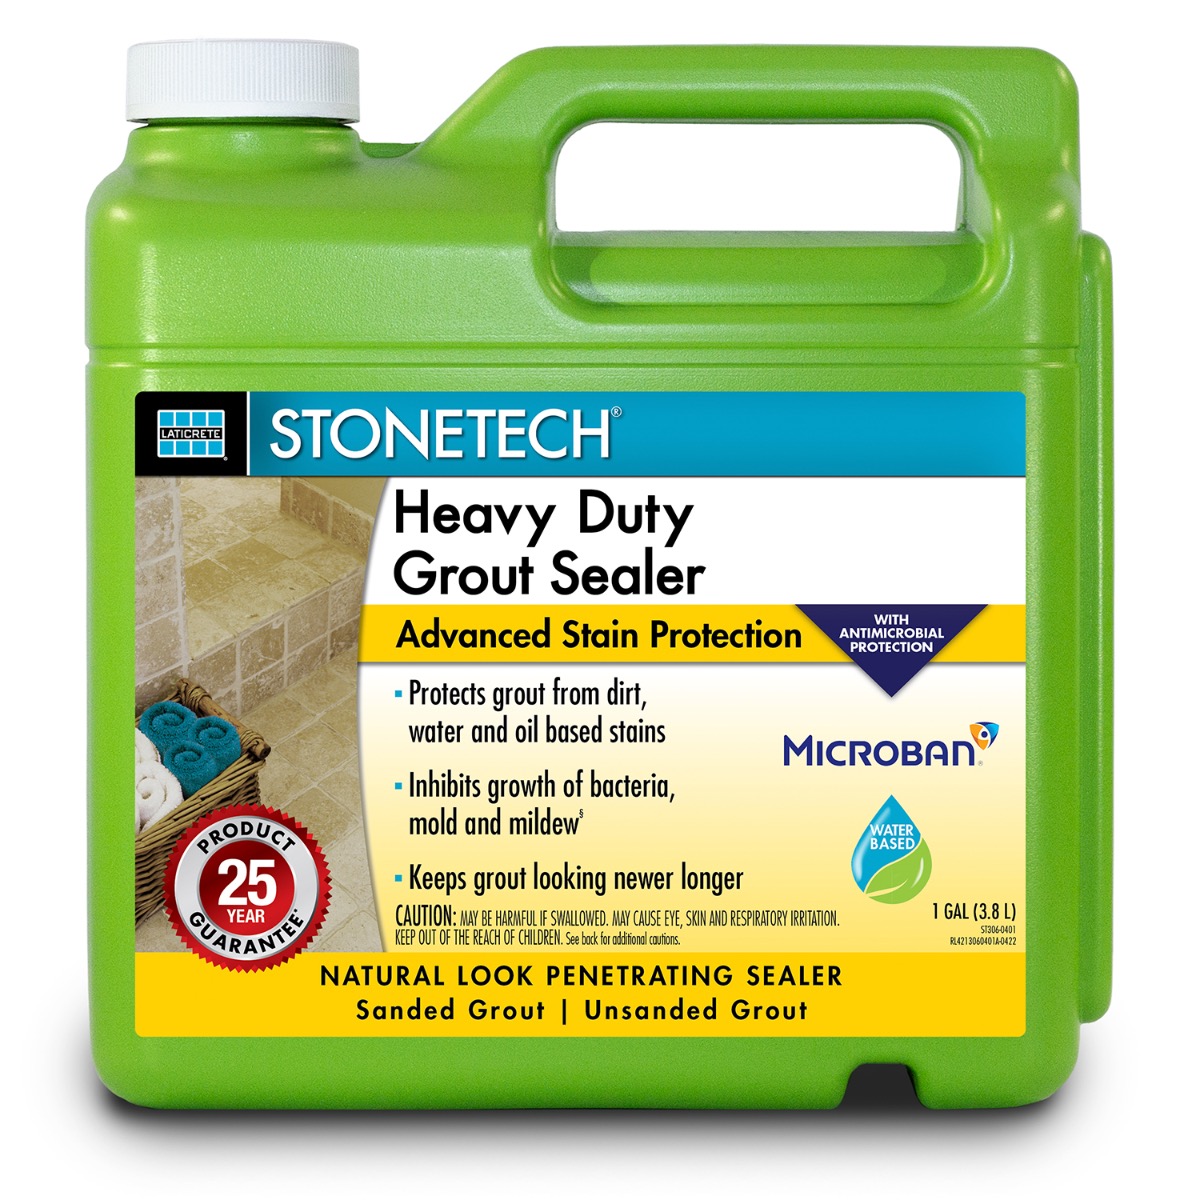 Laticrete Heavy Duty Grout Sealer for Natural Stone, Tile, & Grout - Gallon